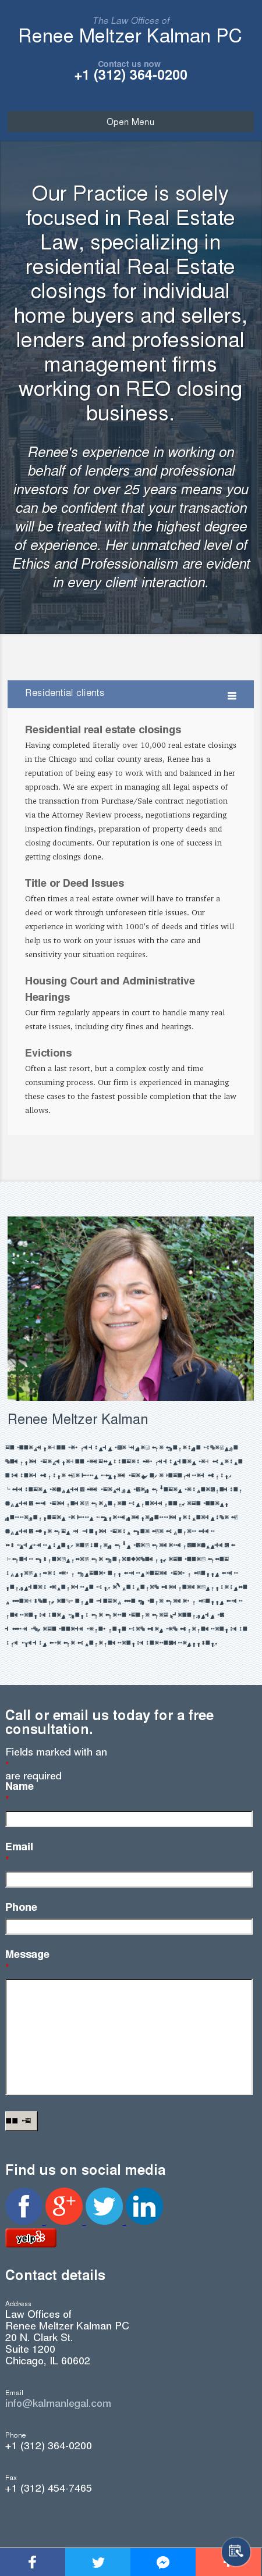 Law Offices of Renee Meltzer Kalman PC - Chicago IL Lawyers